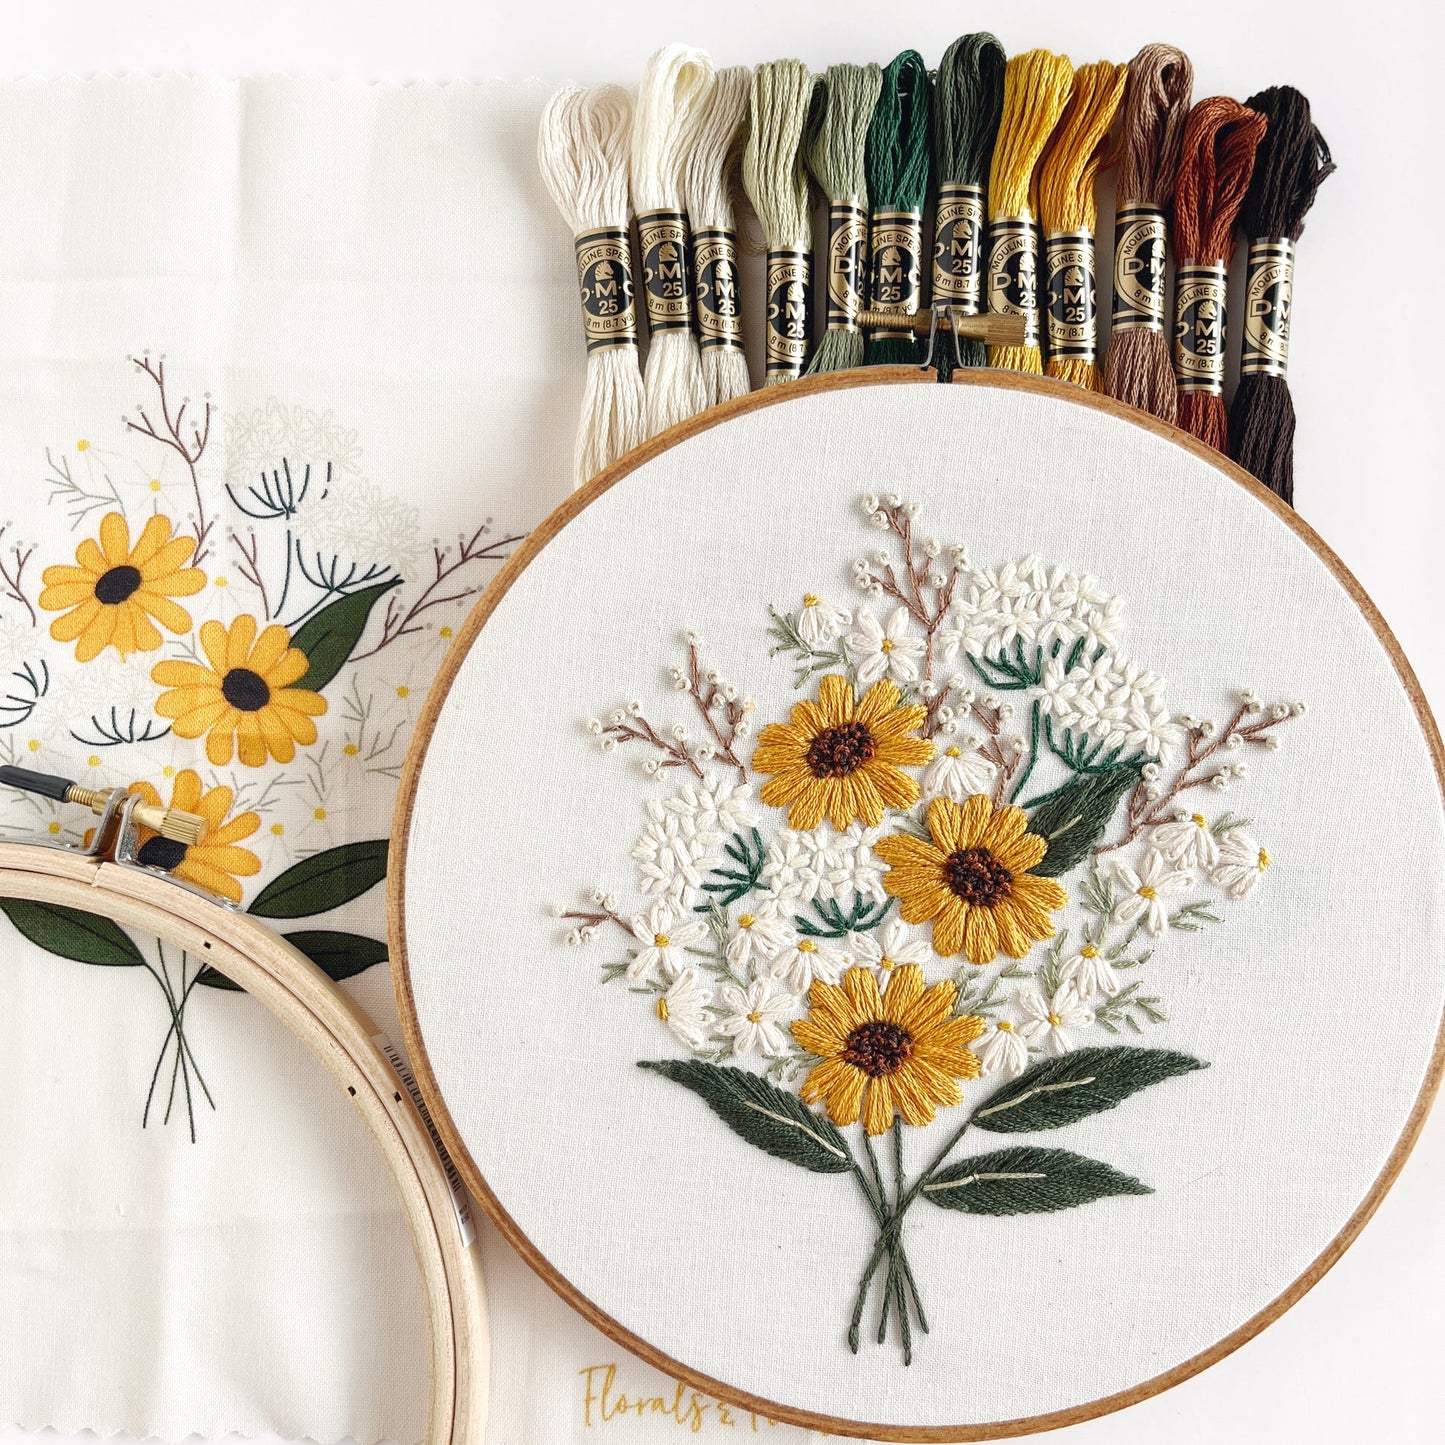 Wildflower Bouquet Embroidery Kit